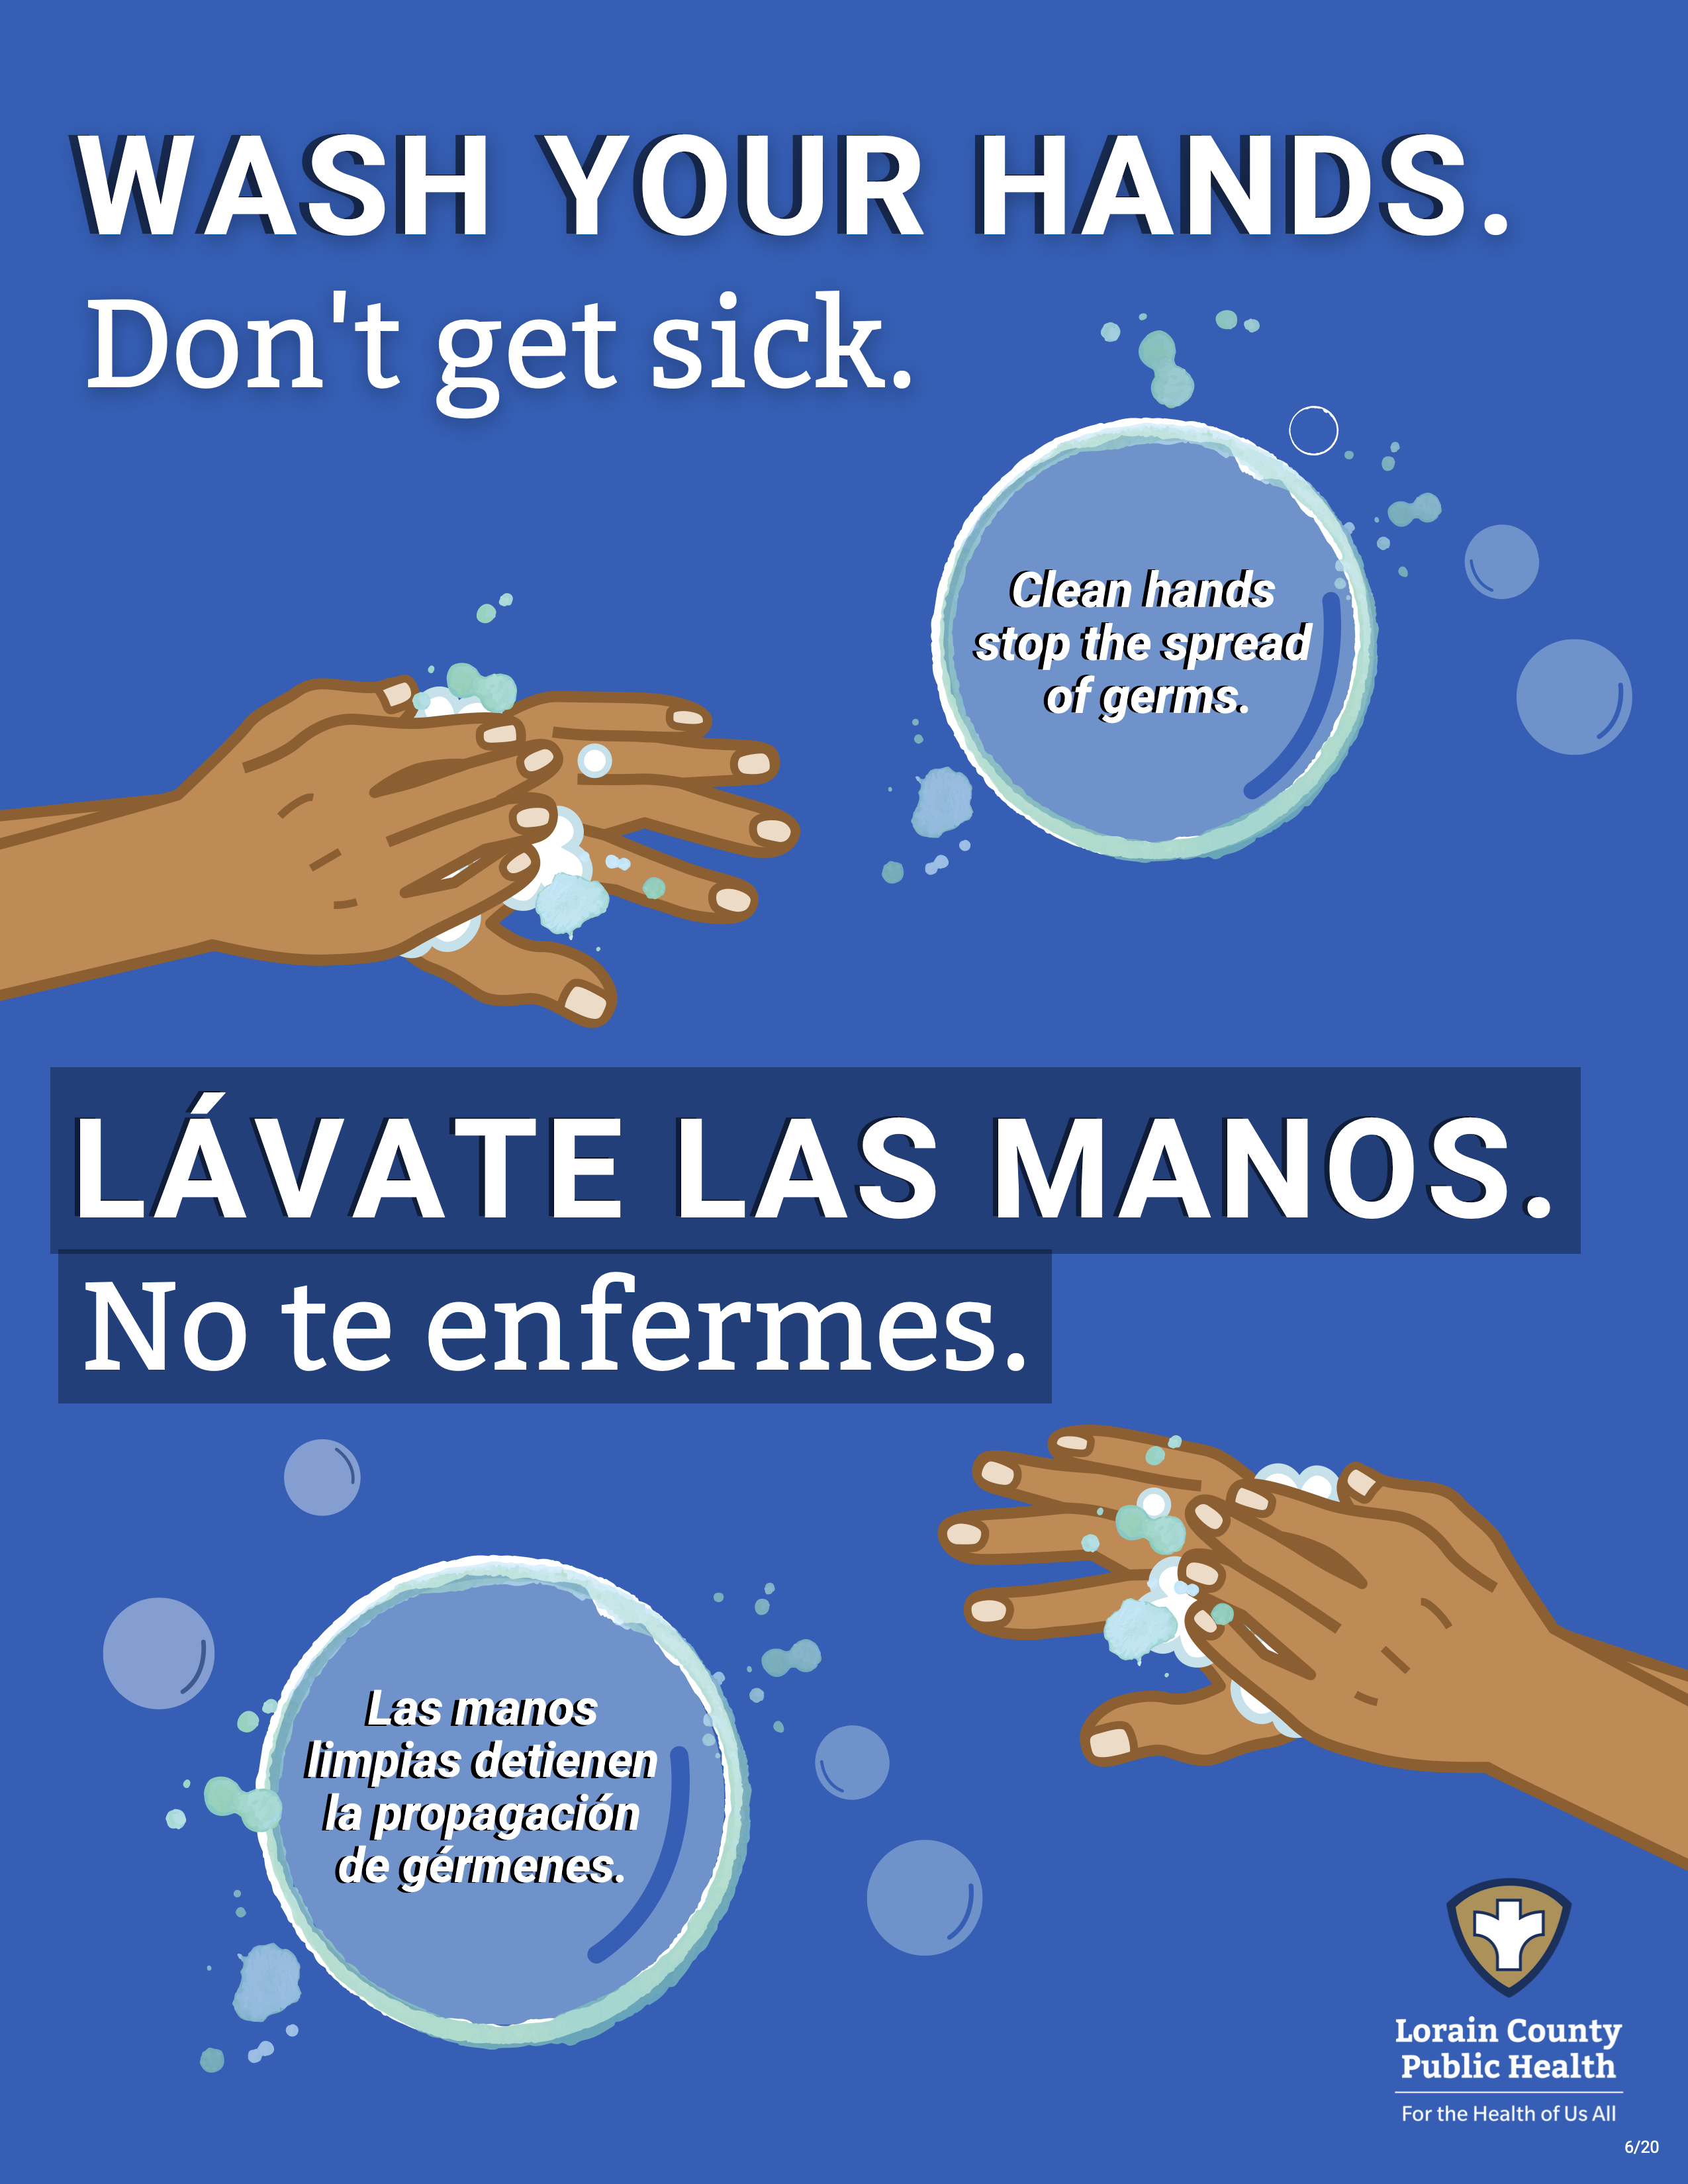 simple wash your hands sign in Spanish and English